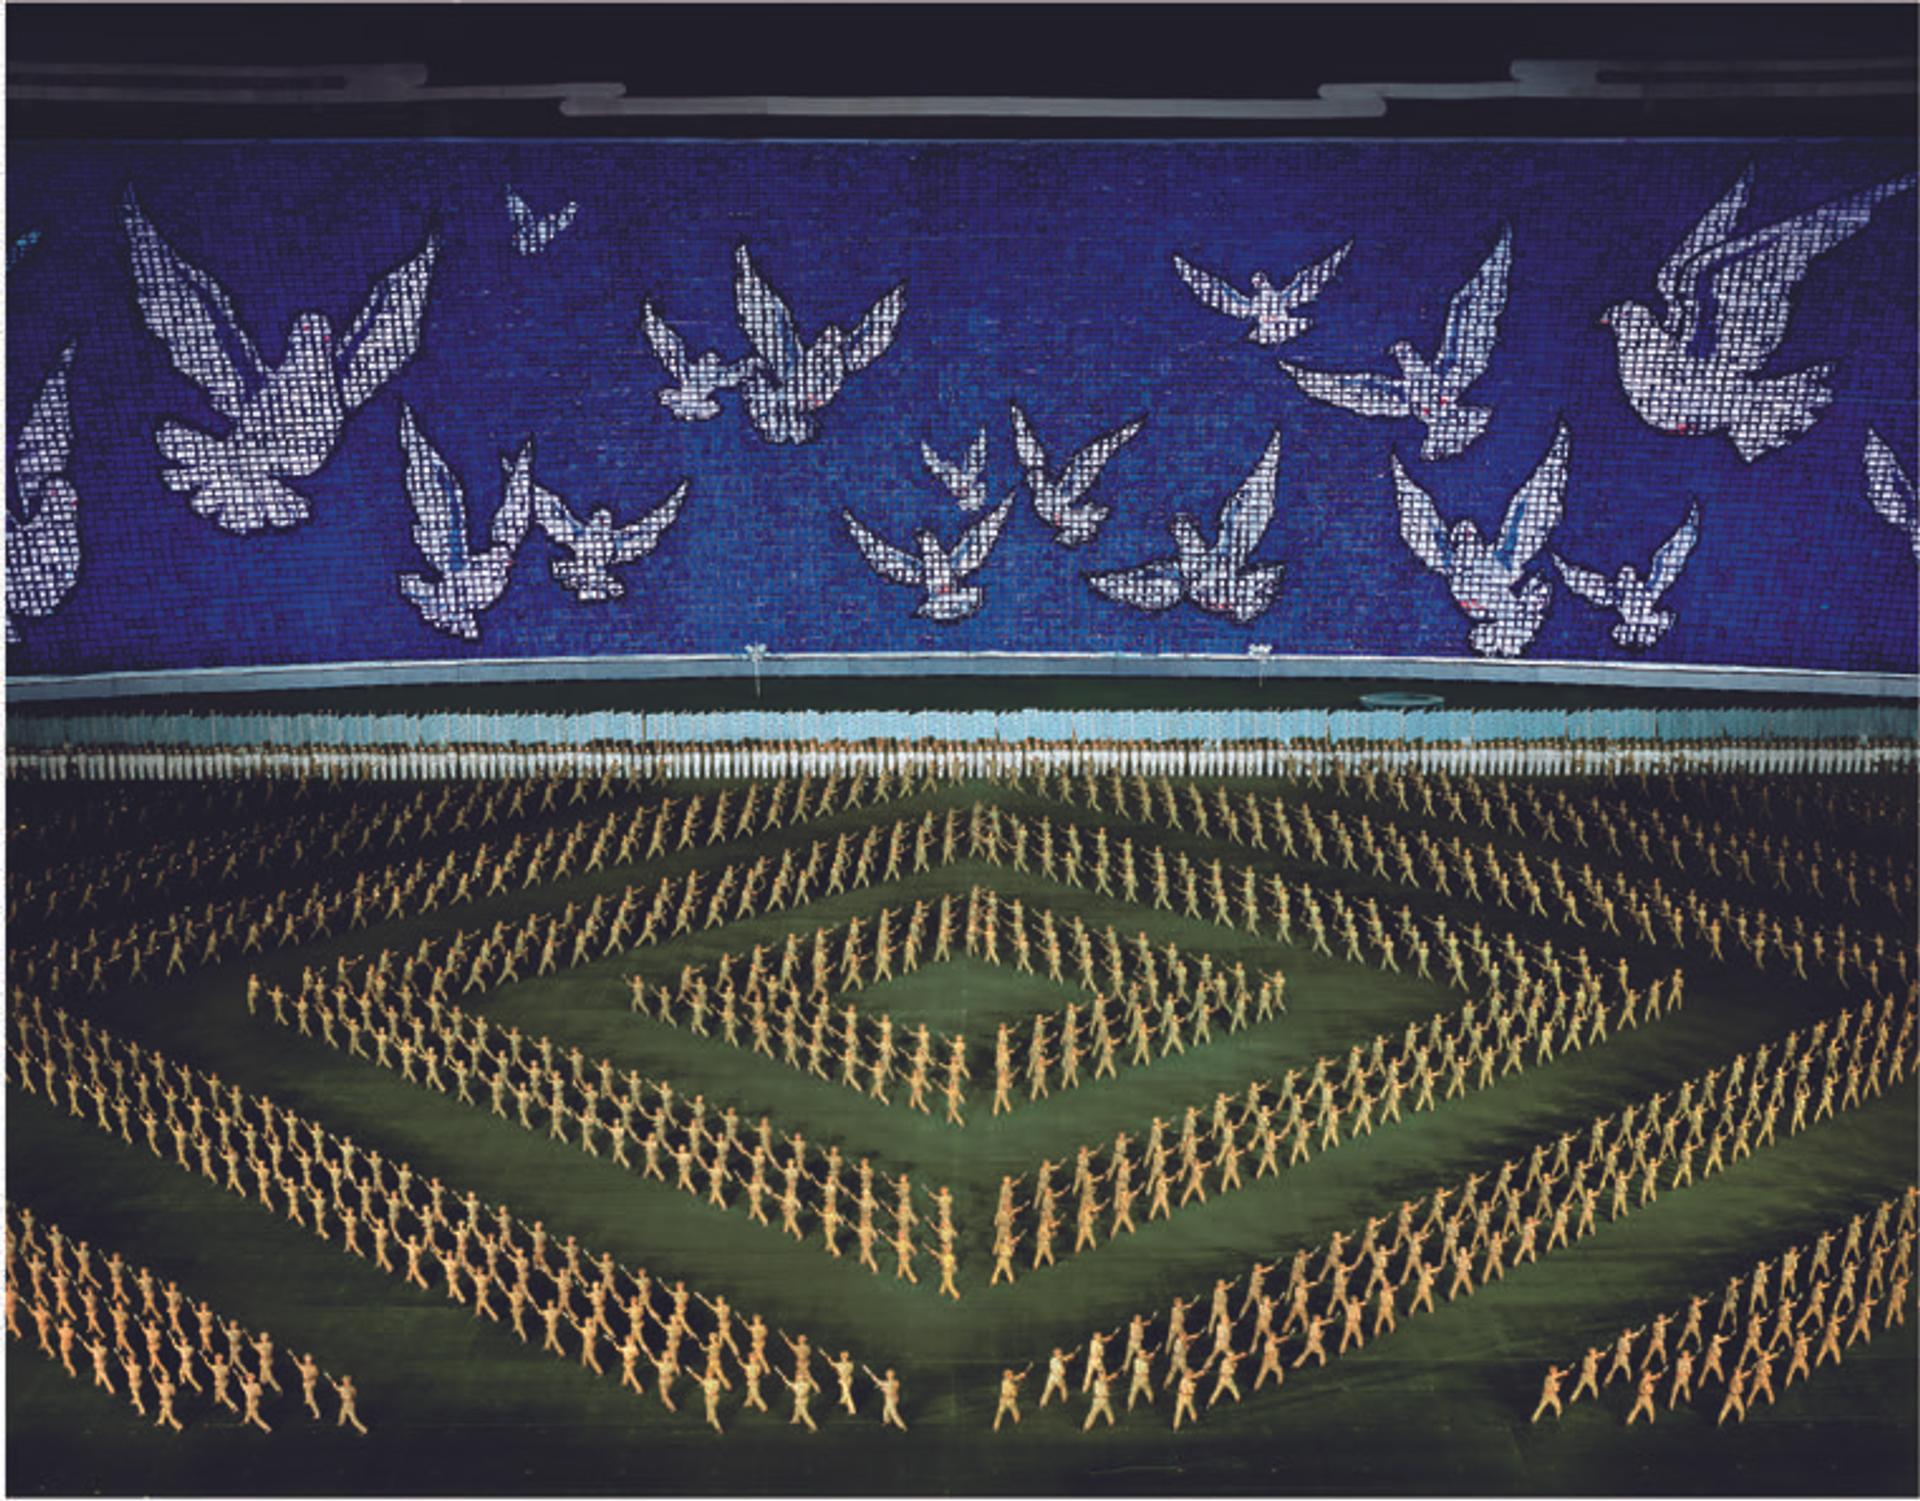 The Axis of Evil: Traveling to North Korea with ANDREAS GURSKY